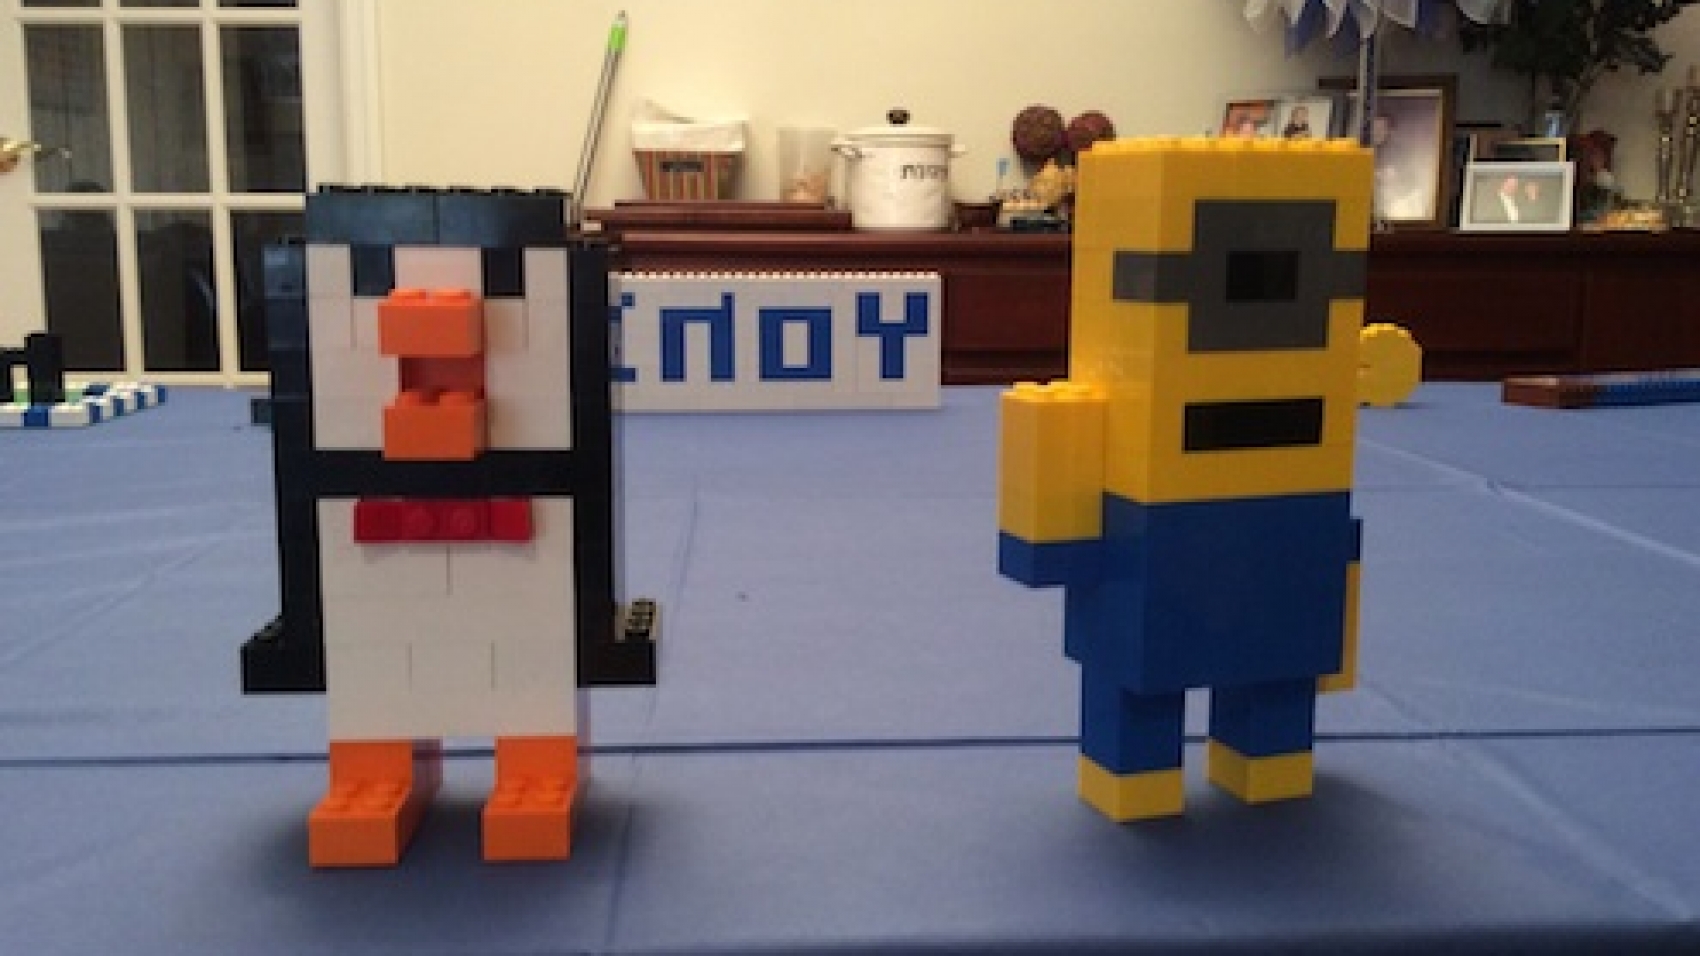 Aren't these cute? Lego Penguin and Despicable Me character as part of a Lego Museum charity fundraiser for a bat mitzvah project.